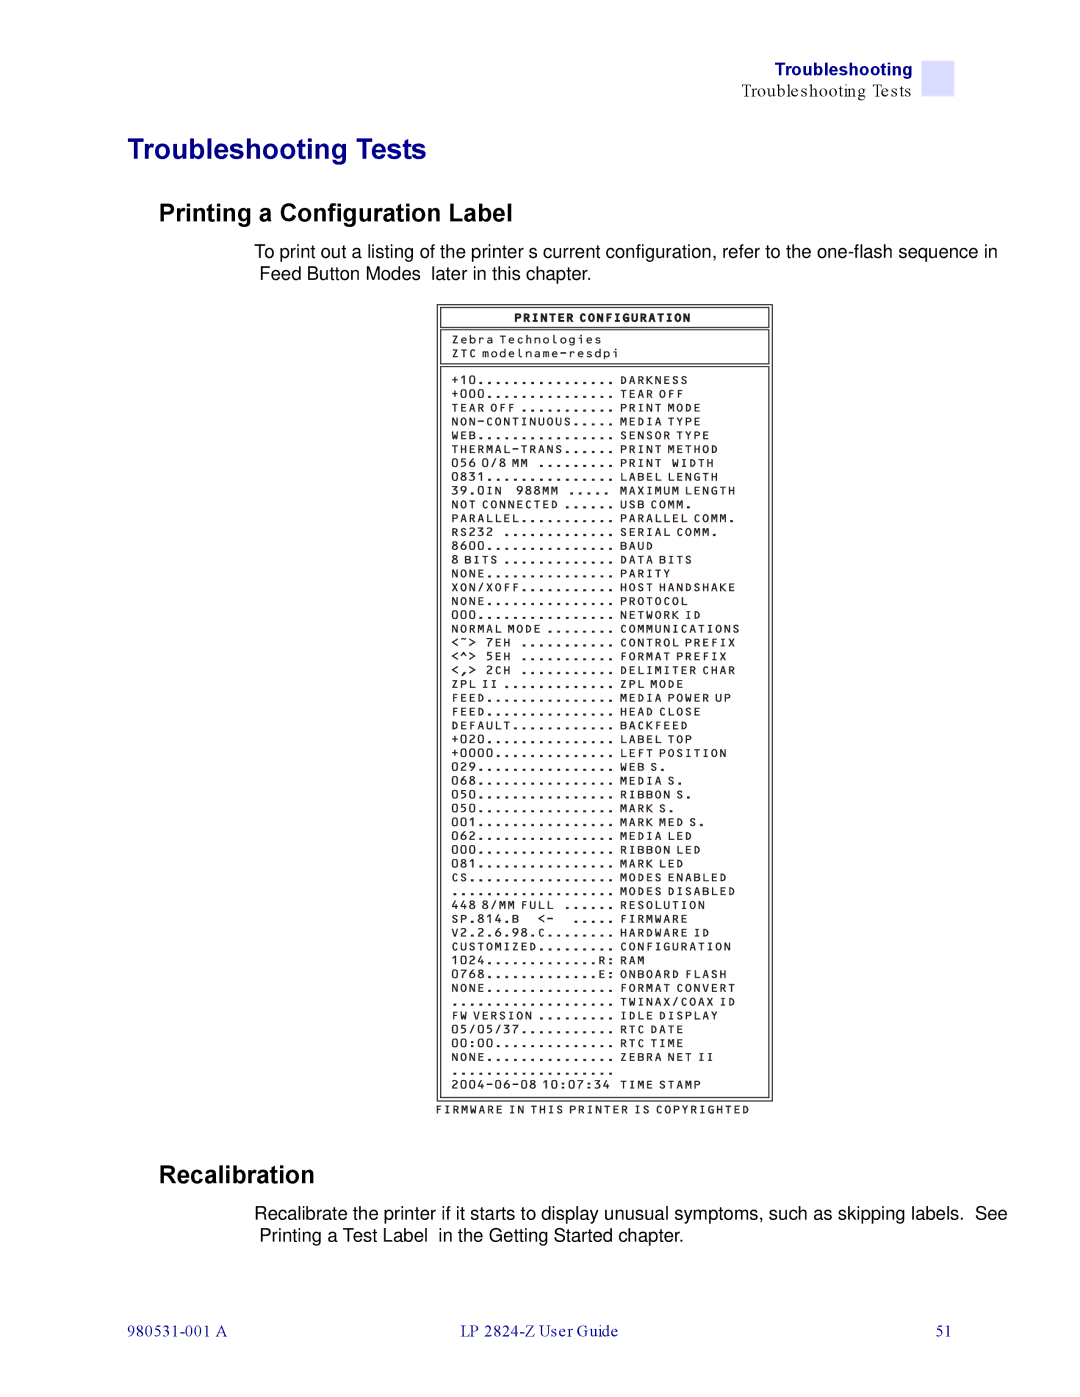 Zebra Technologies H 2824-Z user manual Troubleshooting Tests, Printing a Configuration Label, Recalibration 